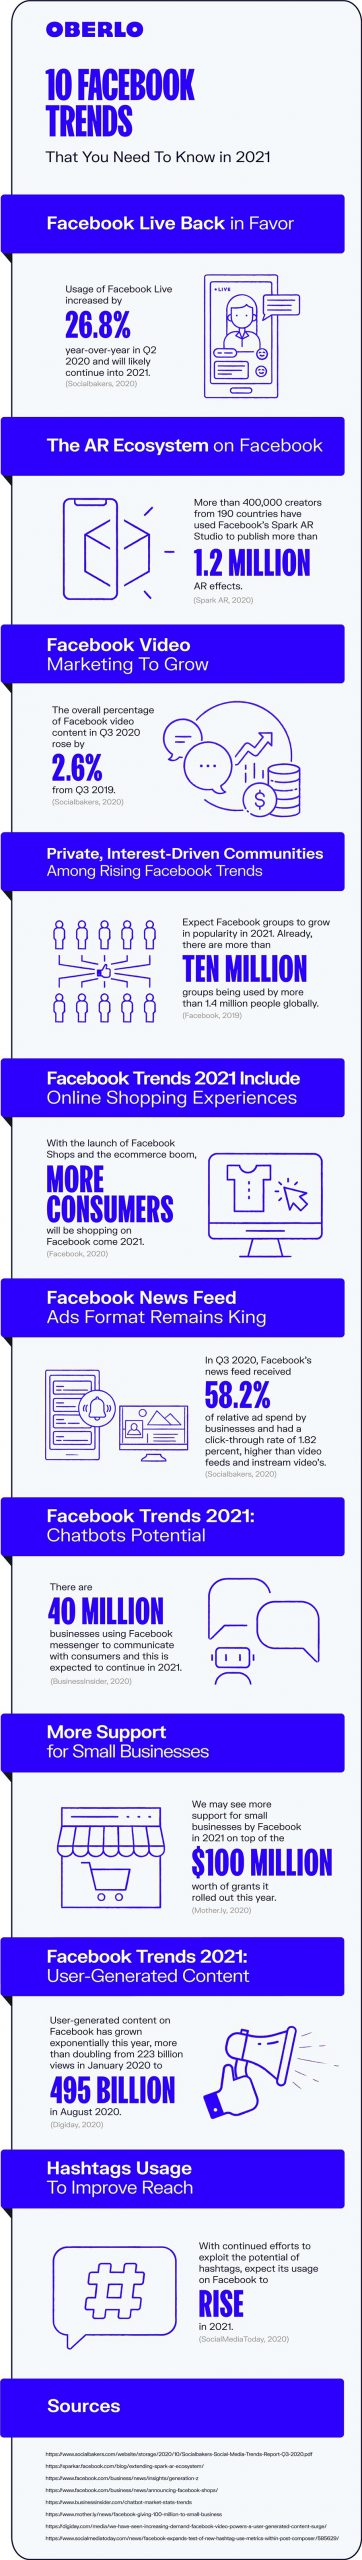 10 facebook trends you need to know in 2021 infographic scaled 1